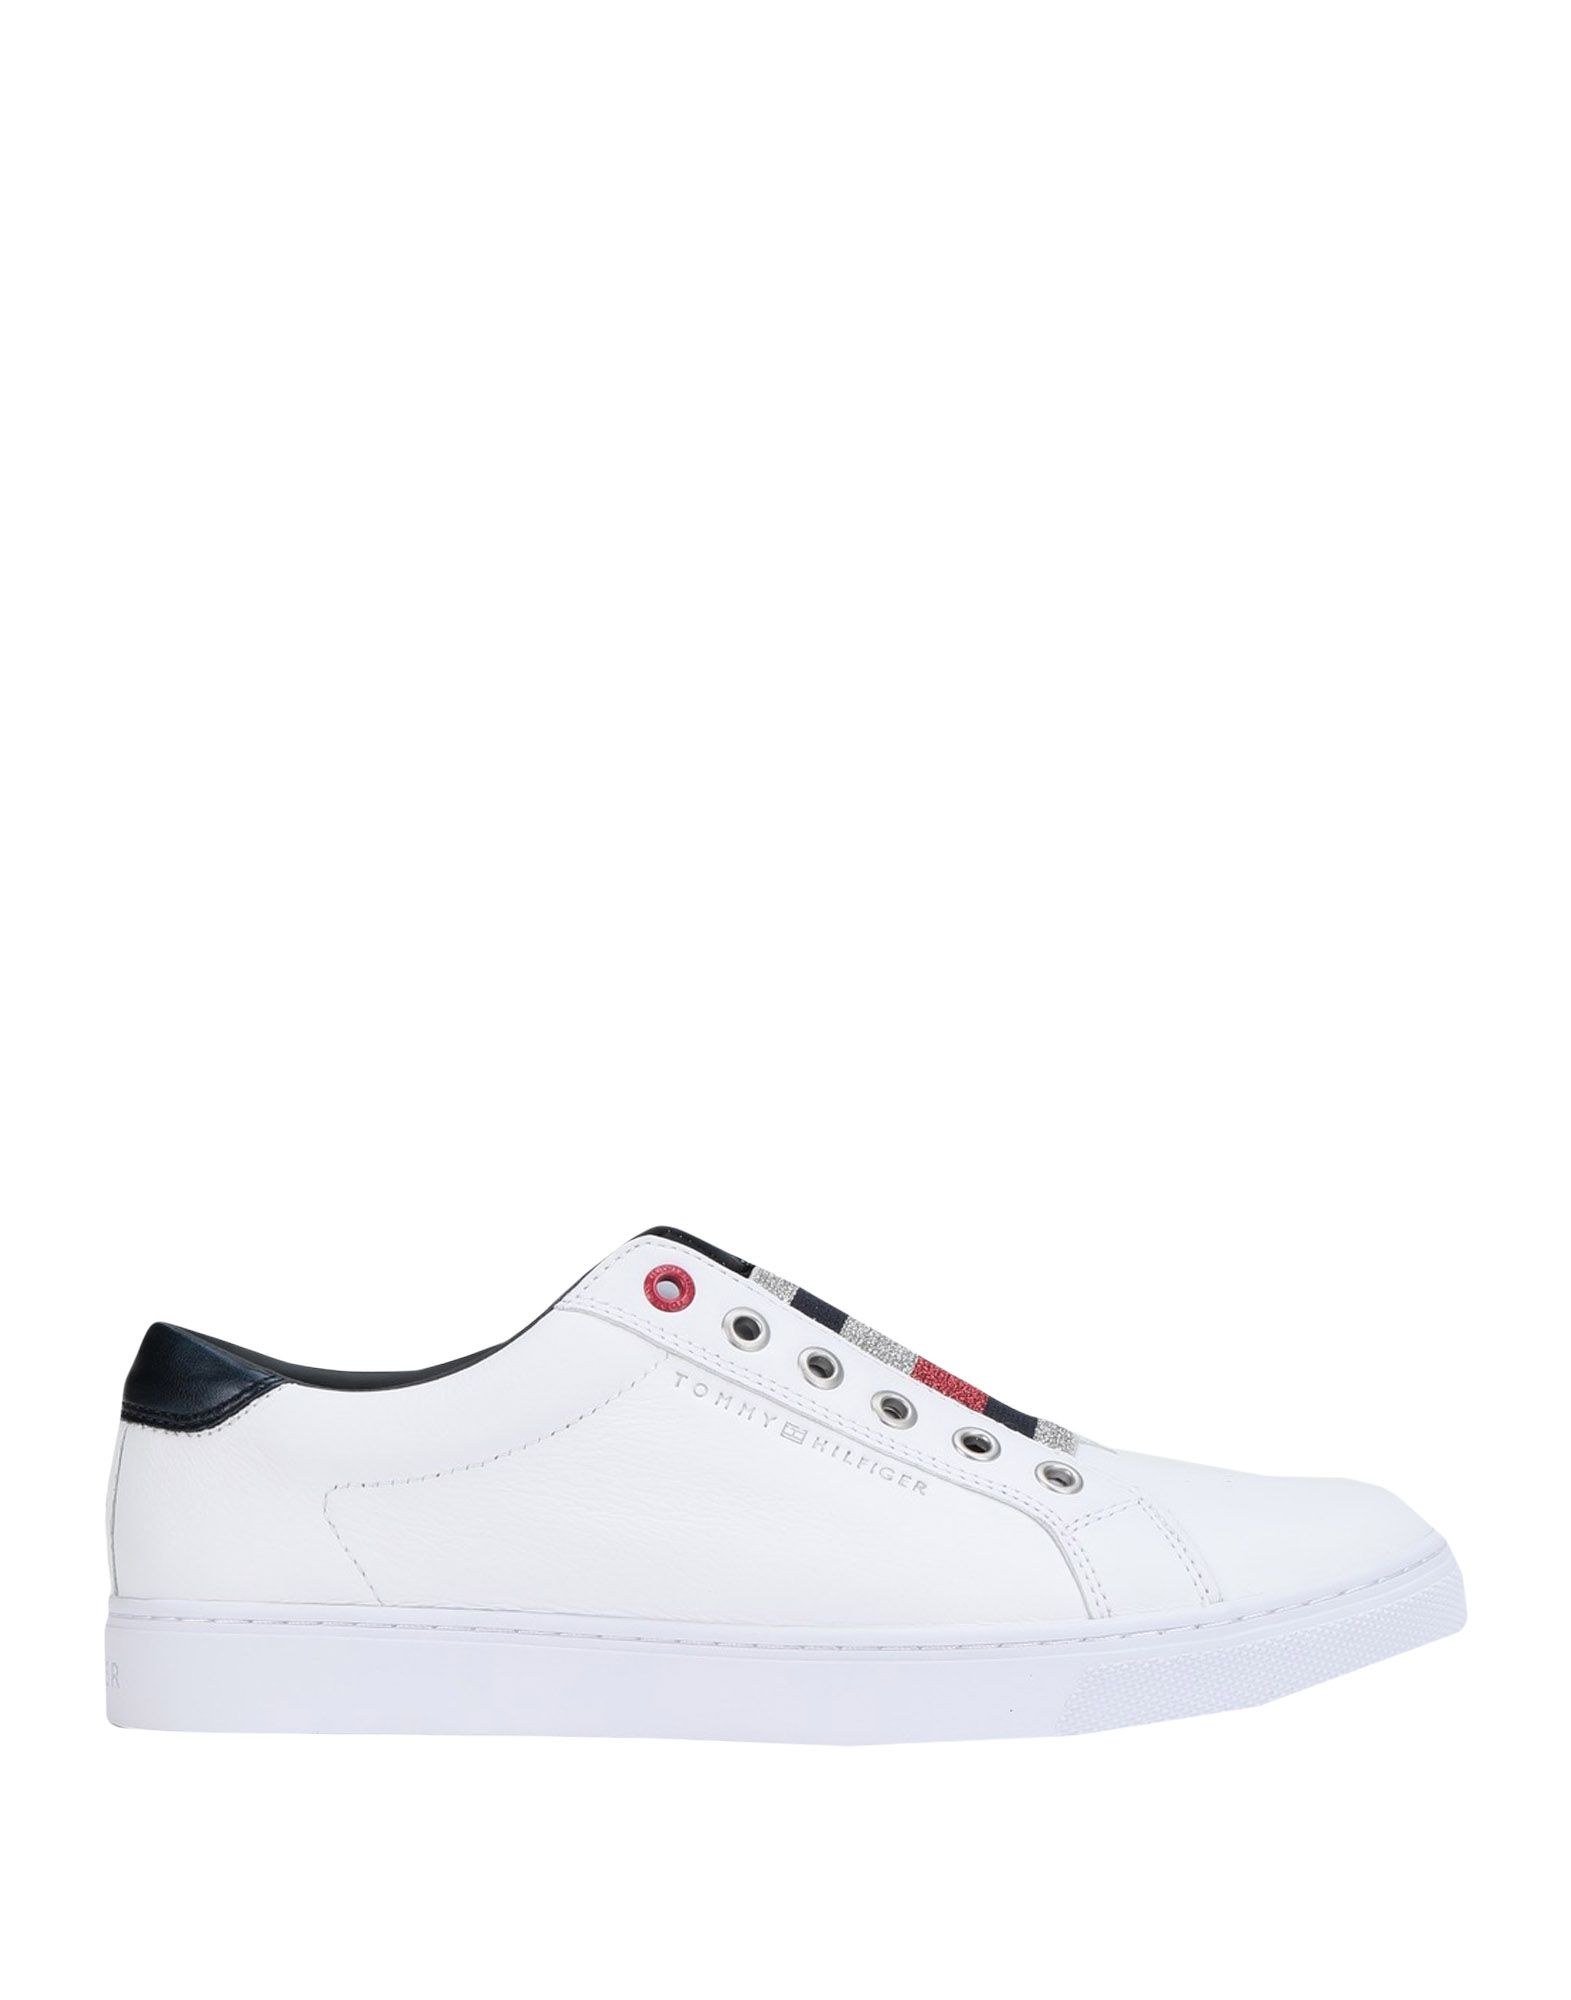 tommy hilfiger sneakers new 9c17ba